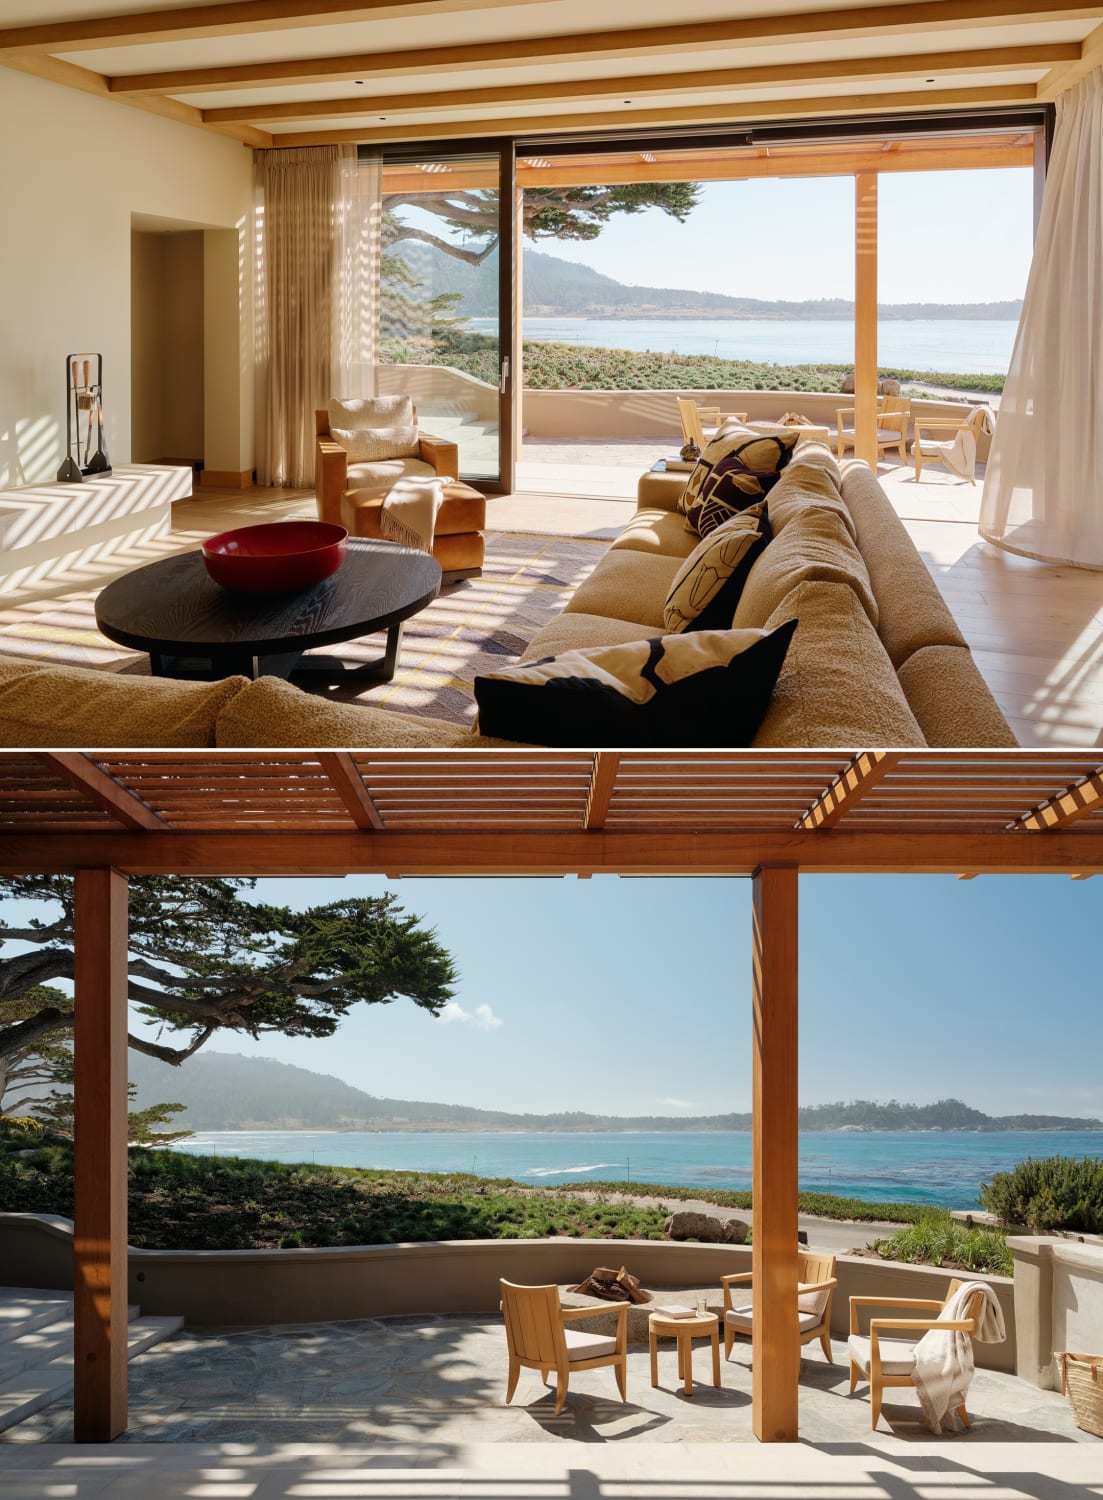 Living area opening up to a deck with views of the ocean, Carmel, California by Studio Schicketanz (Photo: Joe Fletcher)